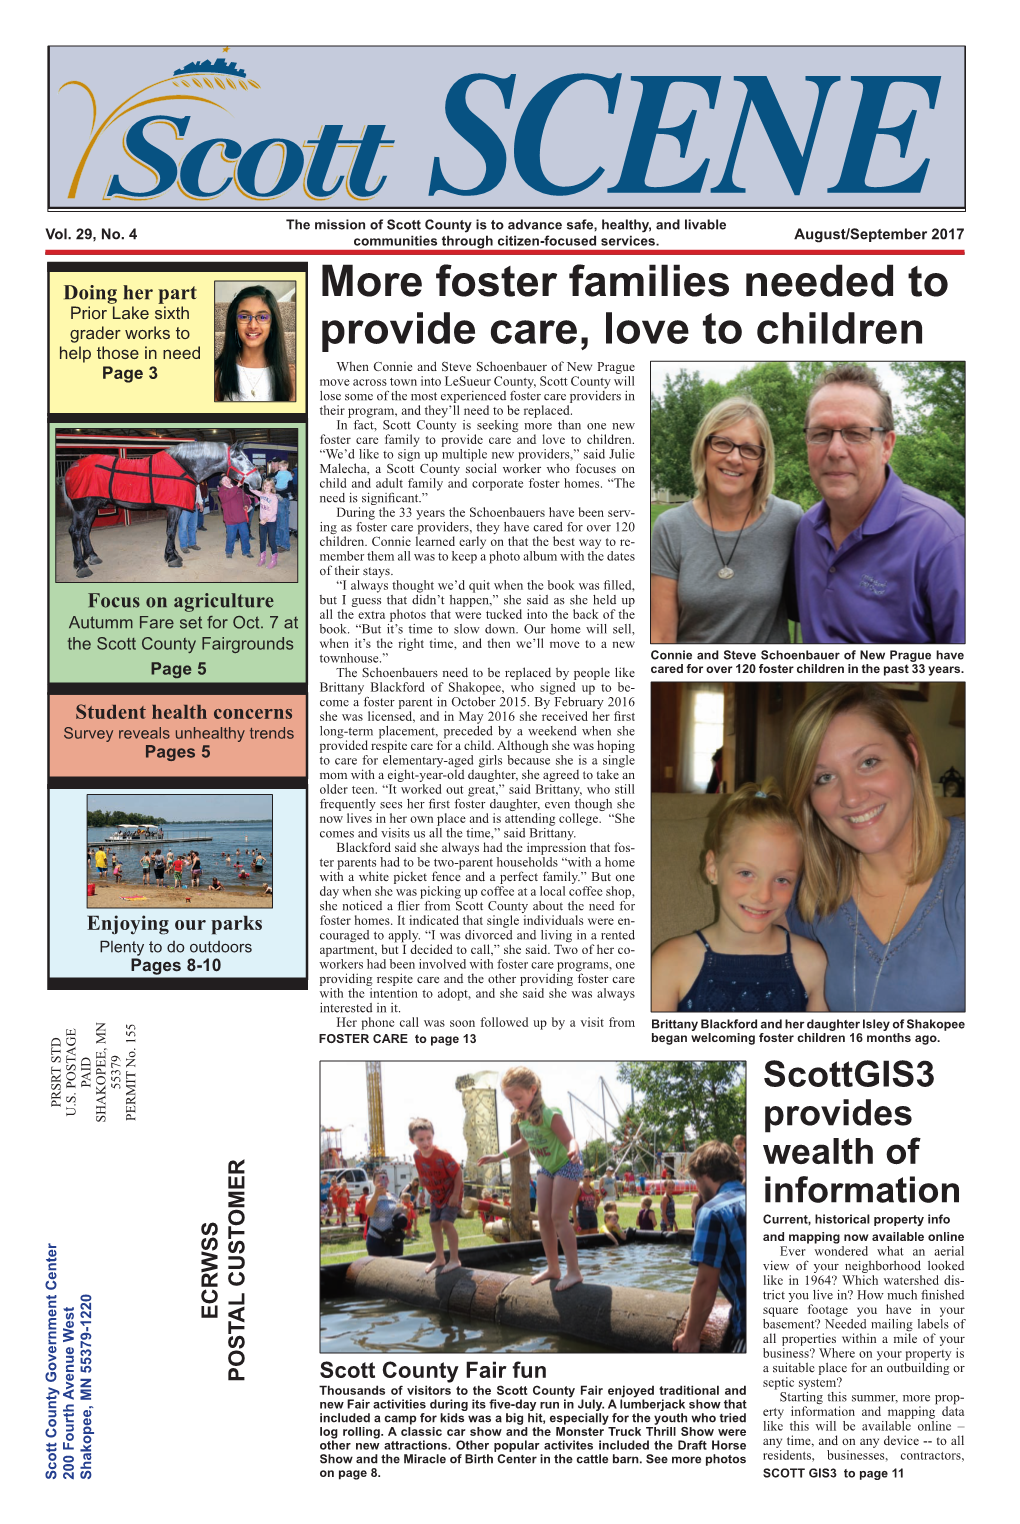 More Foster Families Needed to Provide Care, Love to Children